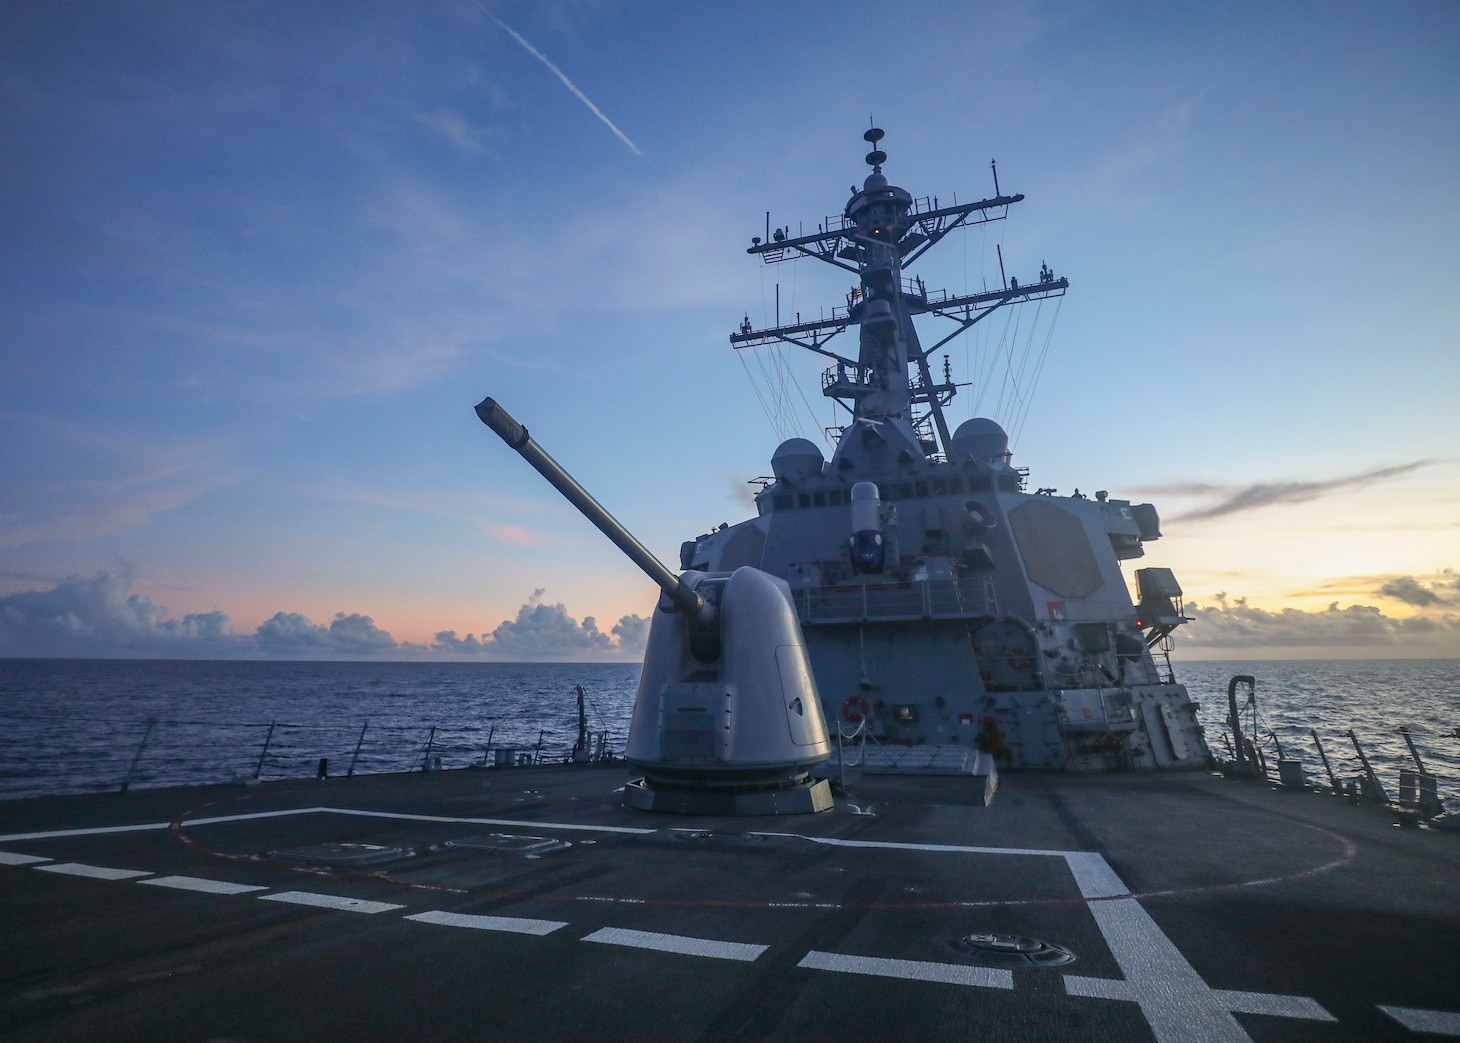 SOUTH CHINA SEA (July 13, 2022) Arleigh Burke-class guided-missile destroyer USS Benfold (DDG 65) conducts routine underway operations. Benfold is forward-deployed to the U.S. 7th Fleet area of operations in support of a free and open Indo-Pacific. (U.S. Navy photo by Mass Communication Specialist 2nd Class Arthur Rosen)